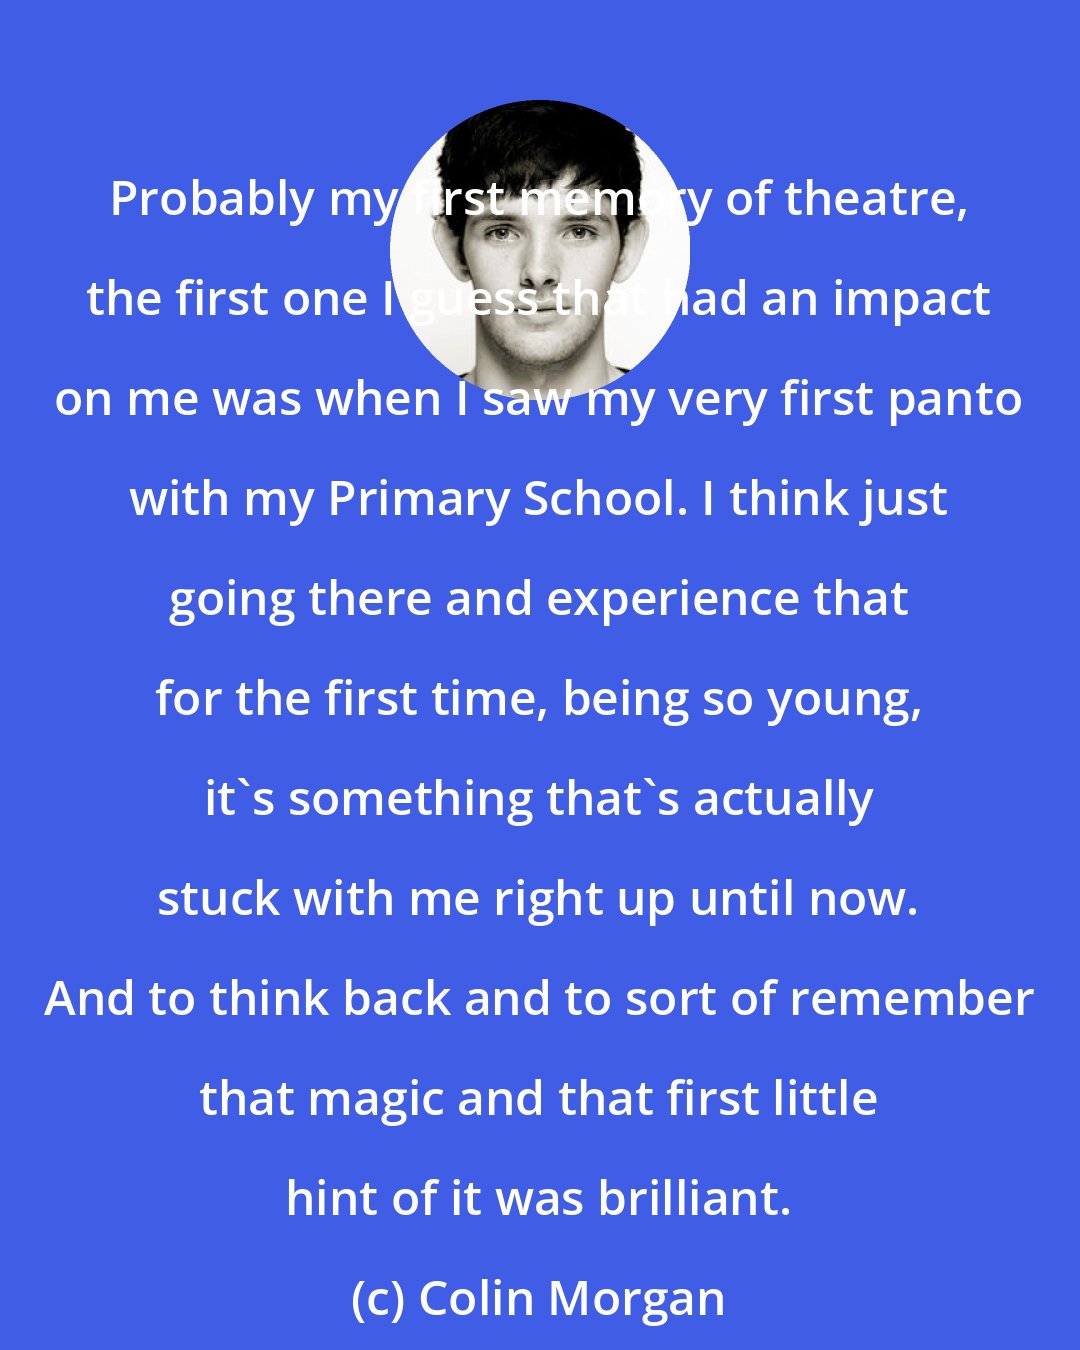 Colin Morgan: Probably my first memory of theatre, the first one I guess that had an impact on me was when I saw my very first panto with my Primary School. I think just going there and experience that for the first time, being so young, it's something that's actually stuck with me right up until now. And to think back and to sort of remember that magic and that first little hint of it was brilliant.